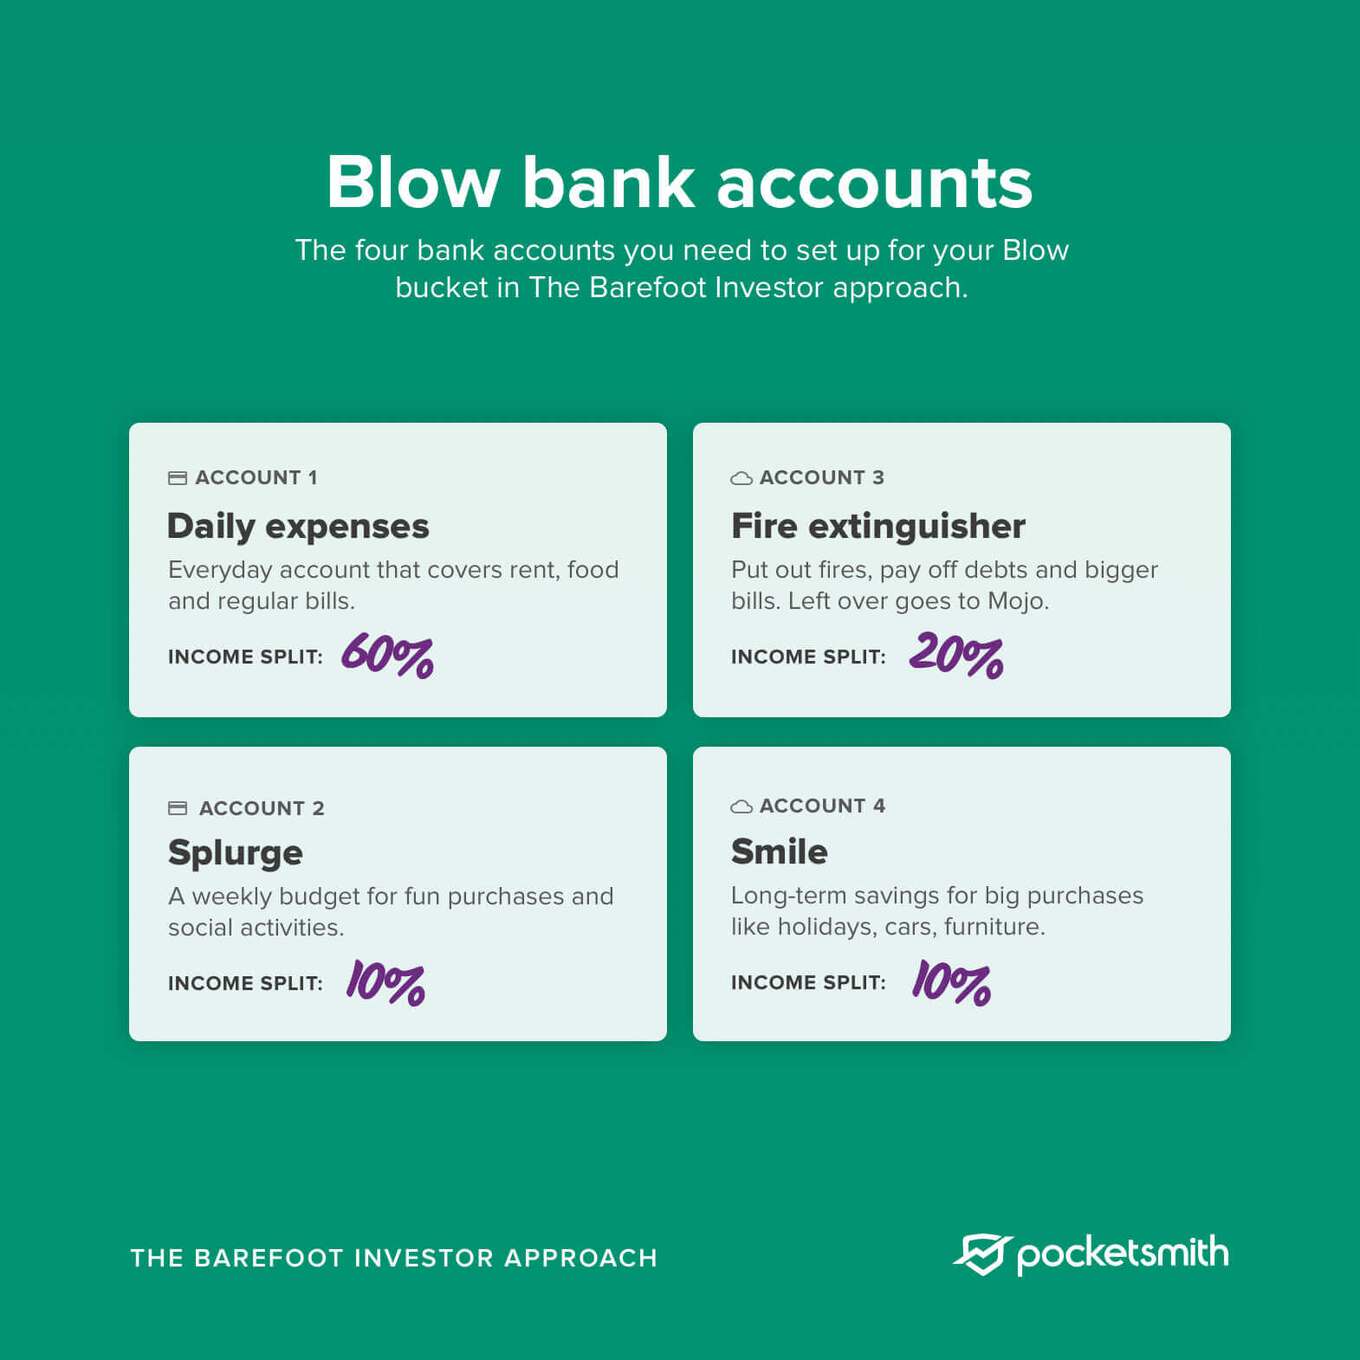 A diagram showing the four bank accounts that need to be set up under the Blow bucket for the Barefoot Investor approach